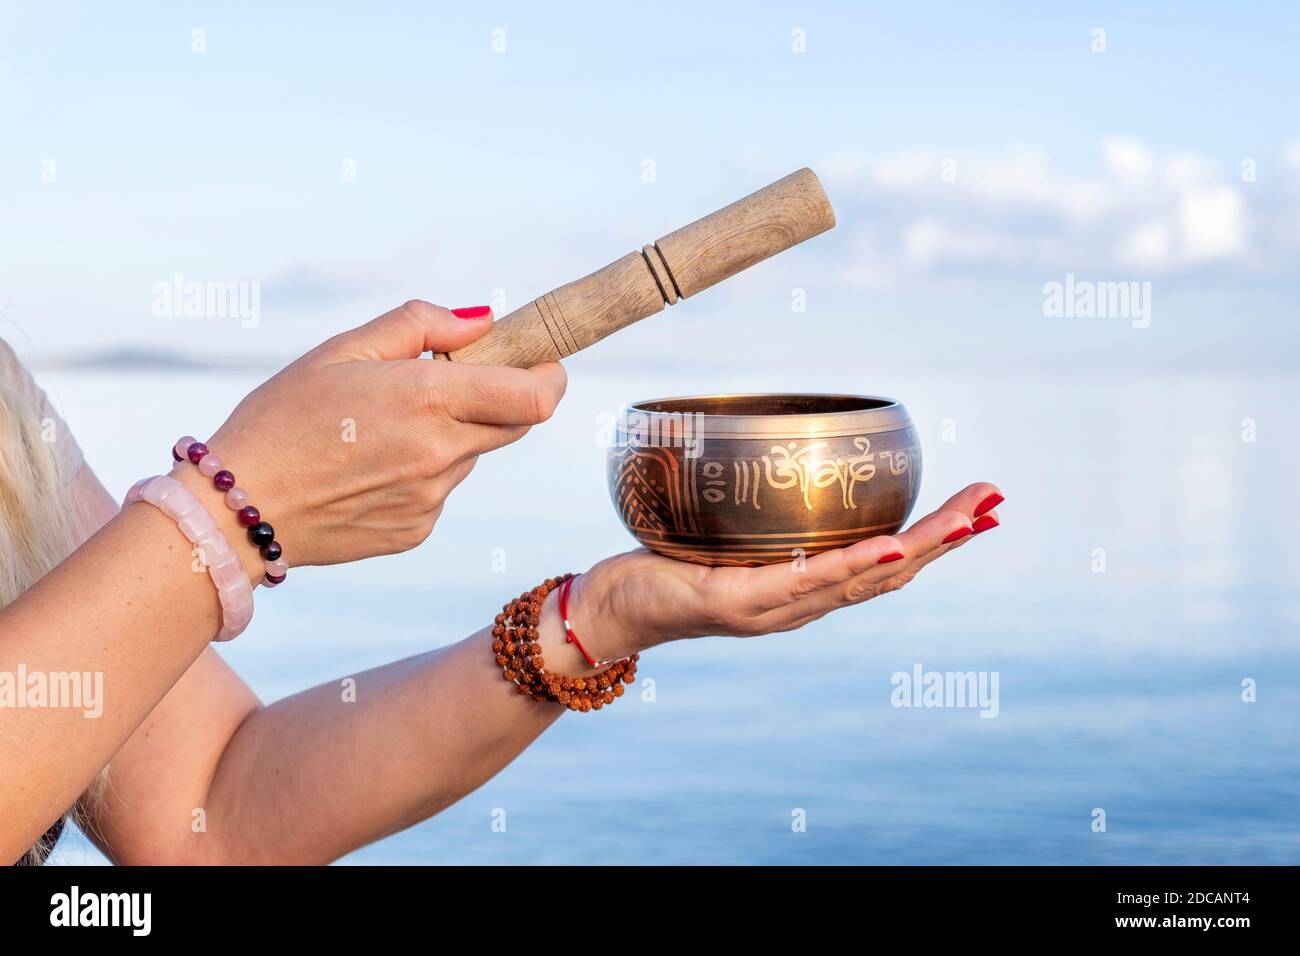 Tibetan singing bowl in female hands on nature background Stock Photo